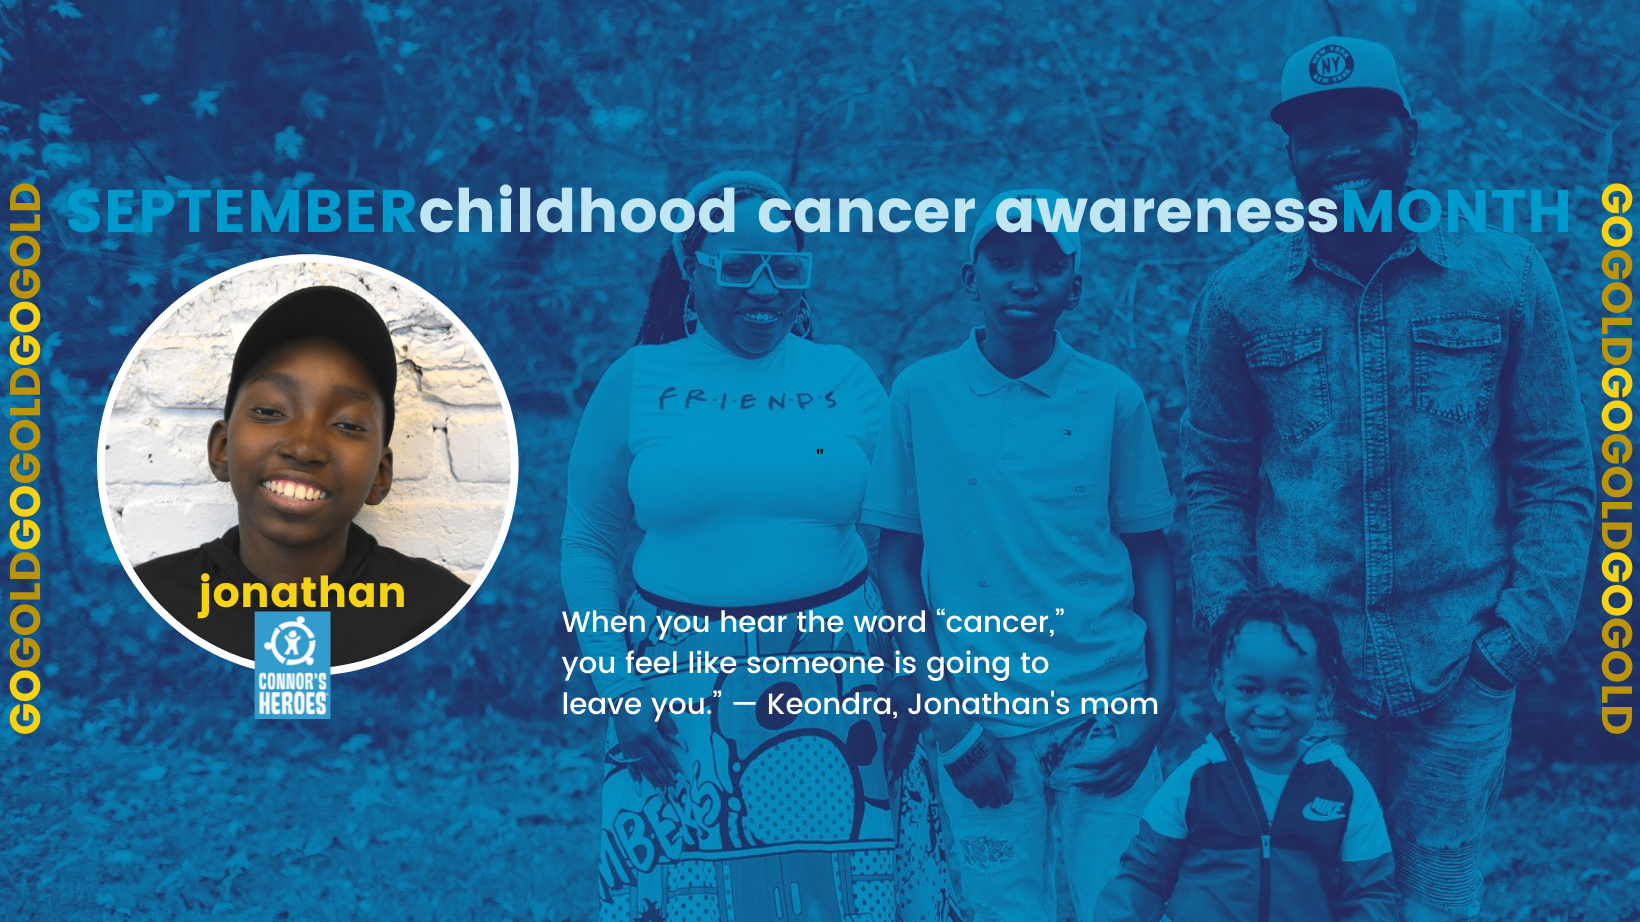 Image teenager smiling in the background is photo of his family text September Childhood Cancer Awareness Month Go Gold